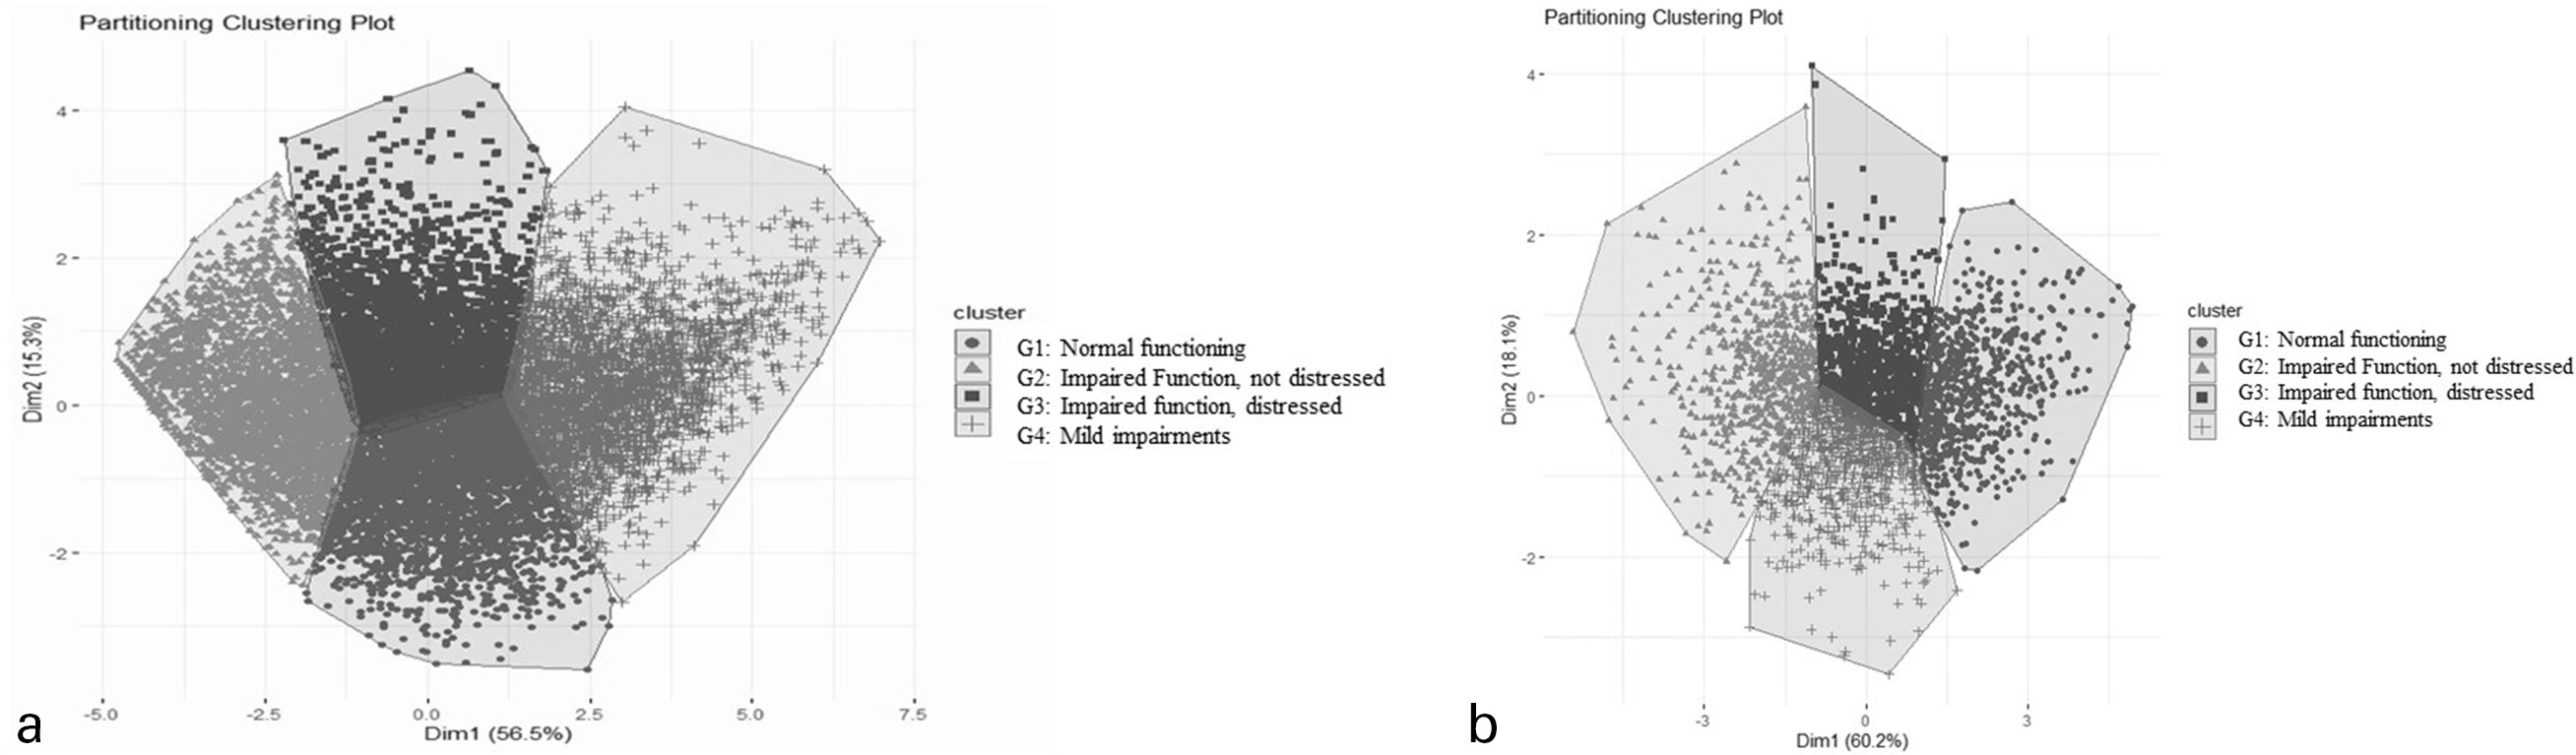 Fig. 1 
            a) This graph shows the partitioning cluster plot for Cohort #1 (Patient-Reported Outcomes Measurement Information System (PROMIS) Short Forms, eight Domains). This graph represents subgroup position relative to each other in two dimensions after the cluster analyses. The x and y axes provide coordinates for this 2D space. These coordinates provide subgroup location through standardized residuals and should not be interpreted as having any absolute value. b) This graph shows the partitioning cluster plot for Cohort #2 (PROMIS Computer Adaptive Testing (CAT), four Domains). This graph represents subgroup position relative to each other in two dimensions after the cluster analyses. The x and y axes provide coordinates for this 2D space. These coordinates provide subgroup location through standardized residuals and should not be interpreted as having any absolute value.
          